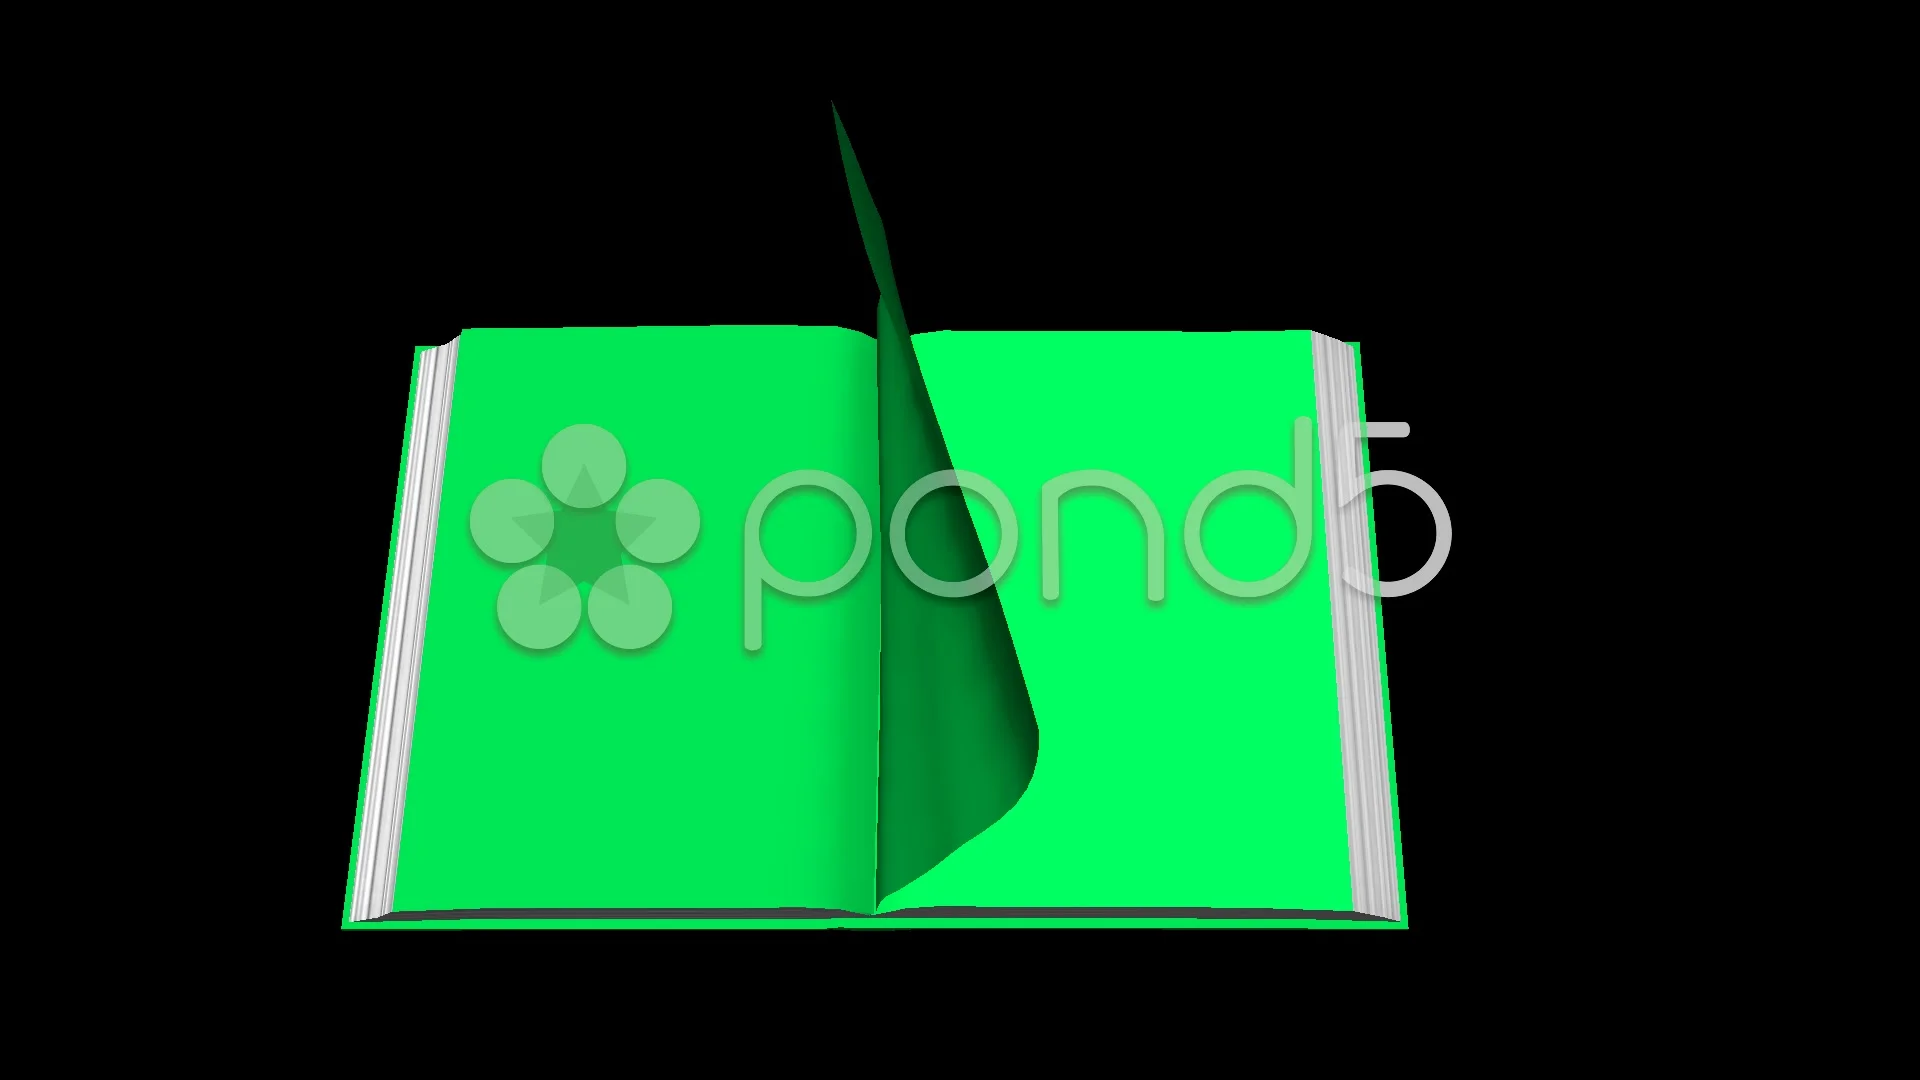 Opening Book Intro Template Green Screen 2Types [1080P] on Make a GIF